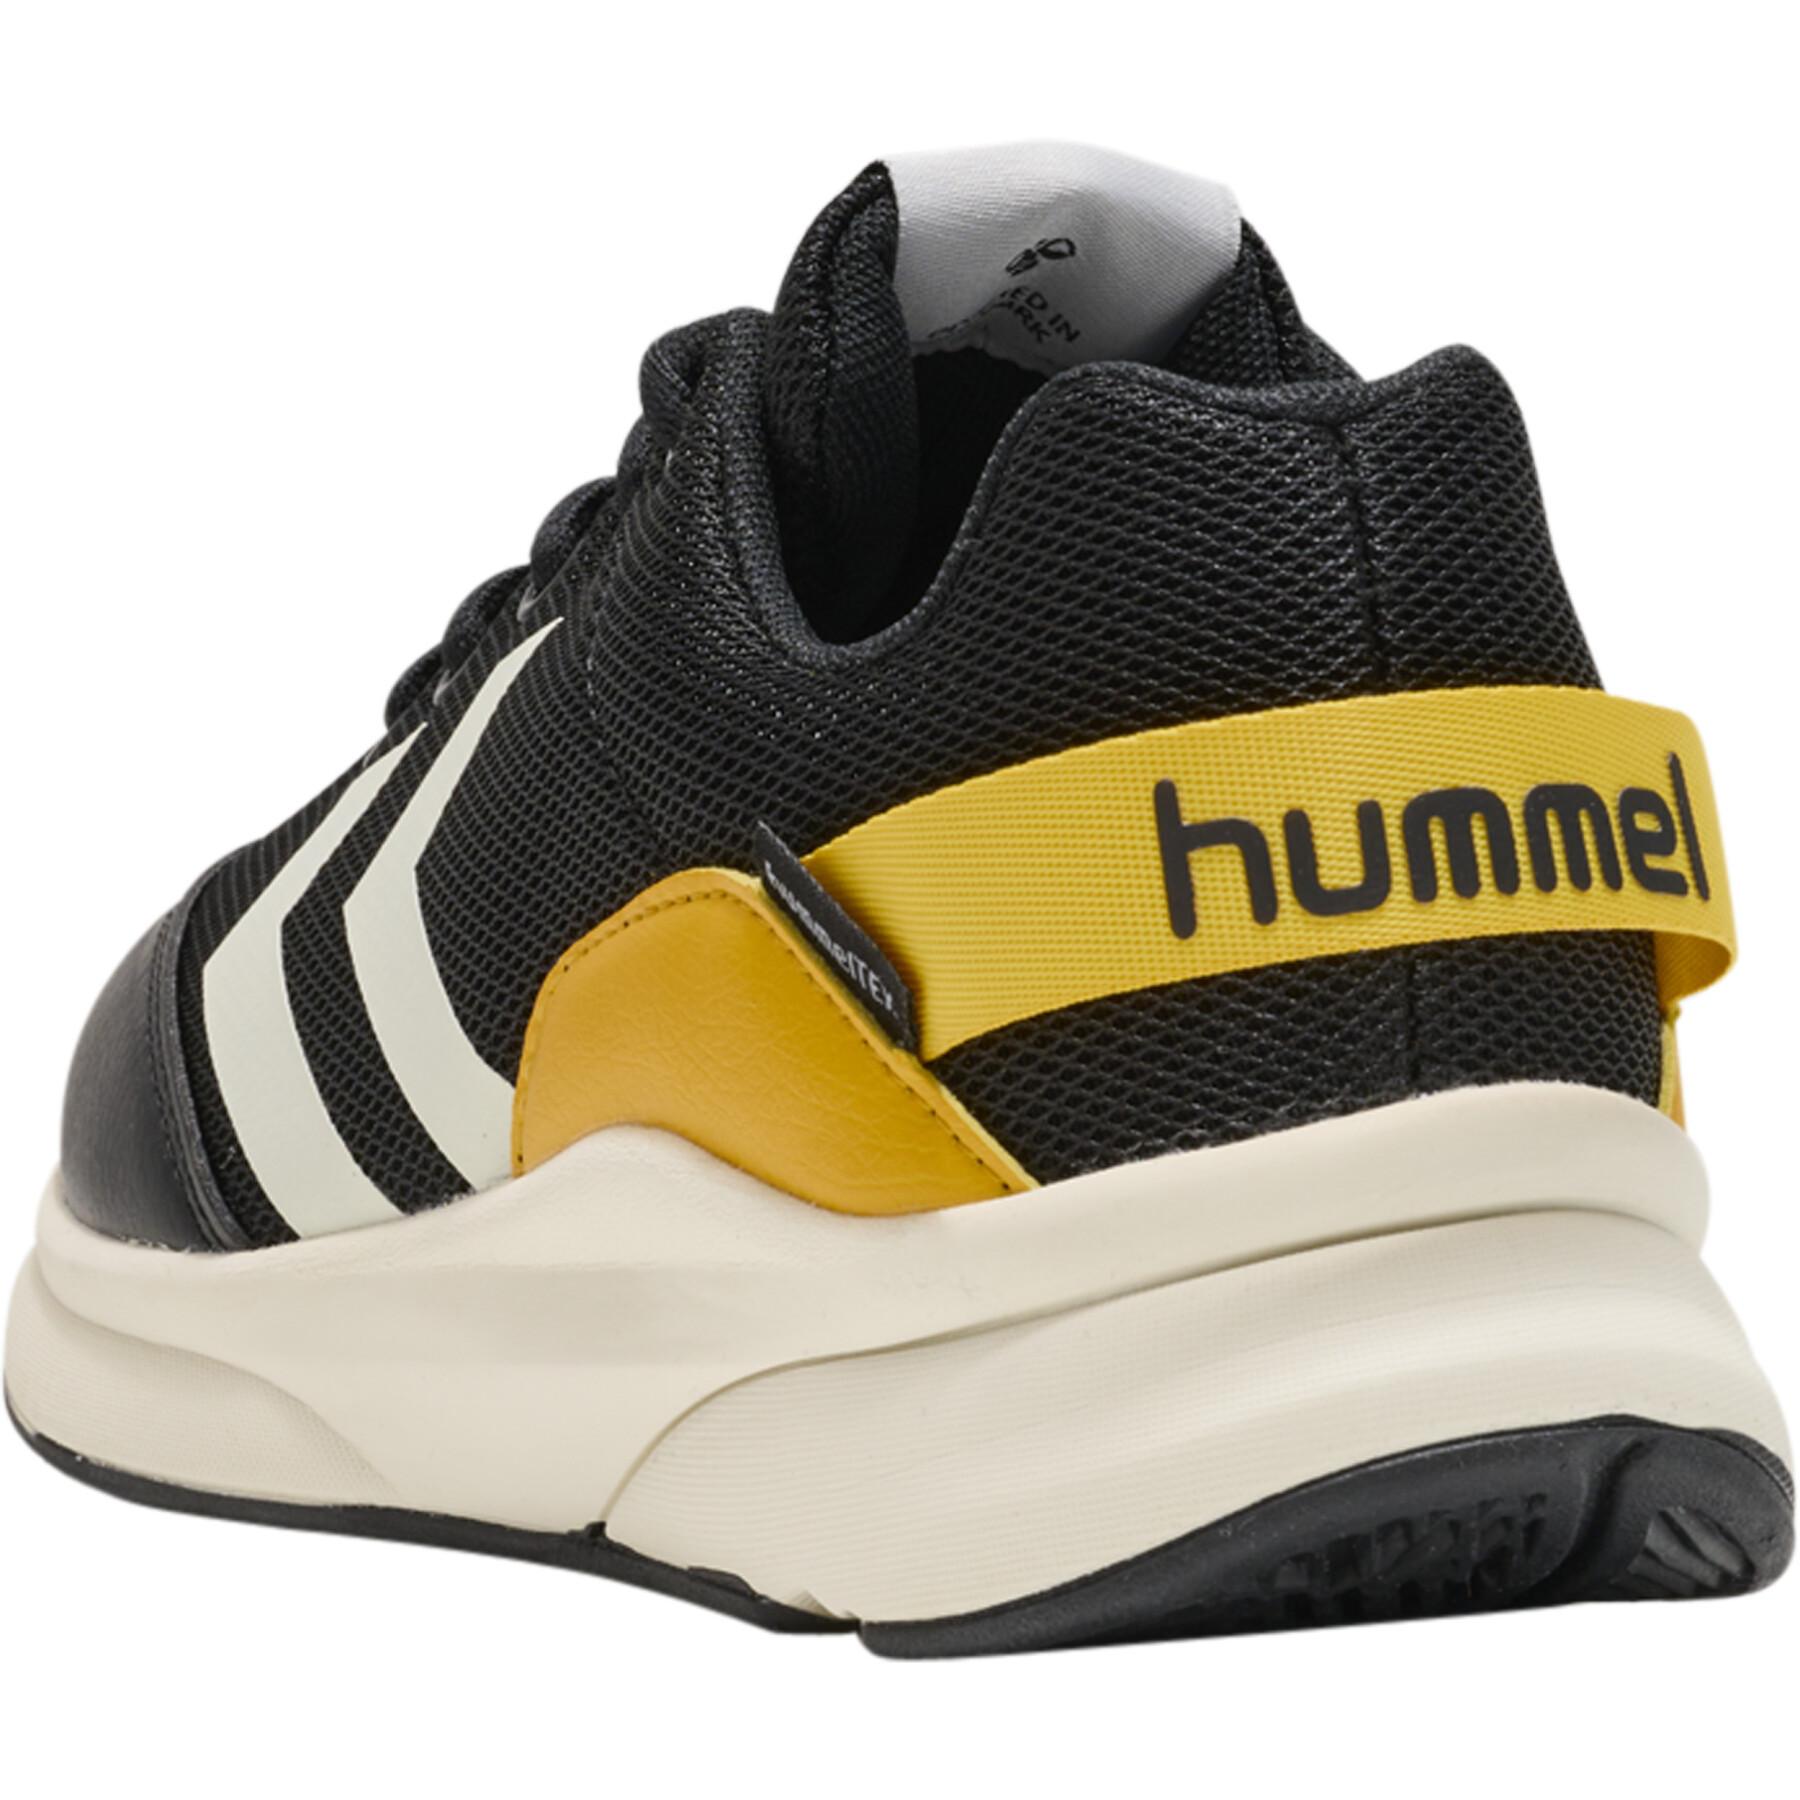 Children's sneakers Hummel Reach 250 Recycled Tex